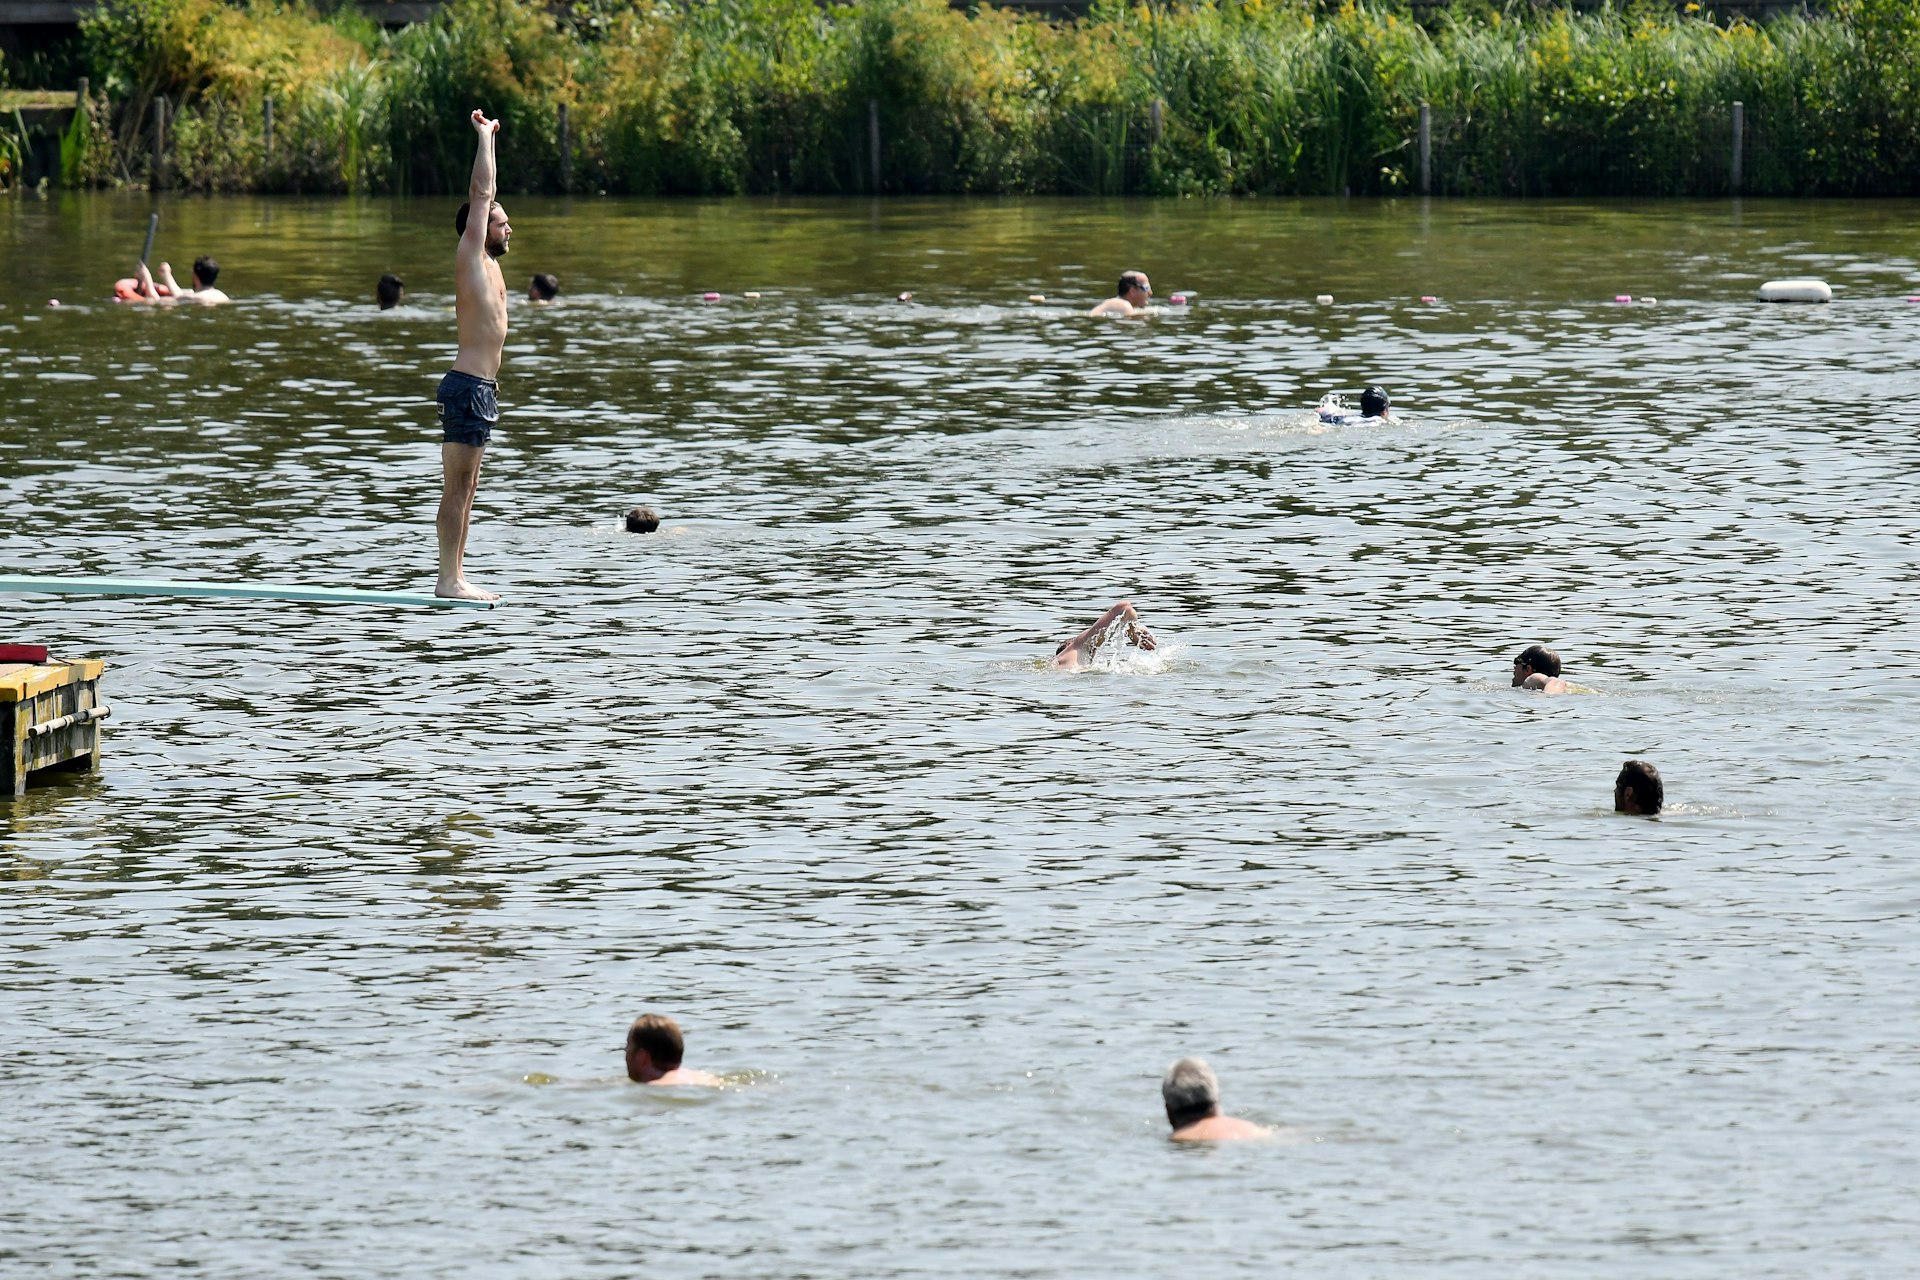 A swimmer prepares to dive into the water at the men's bathing pond in Hampstead Heath in London